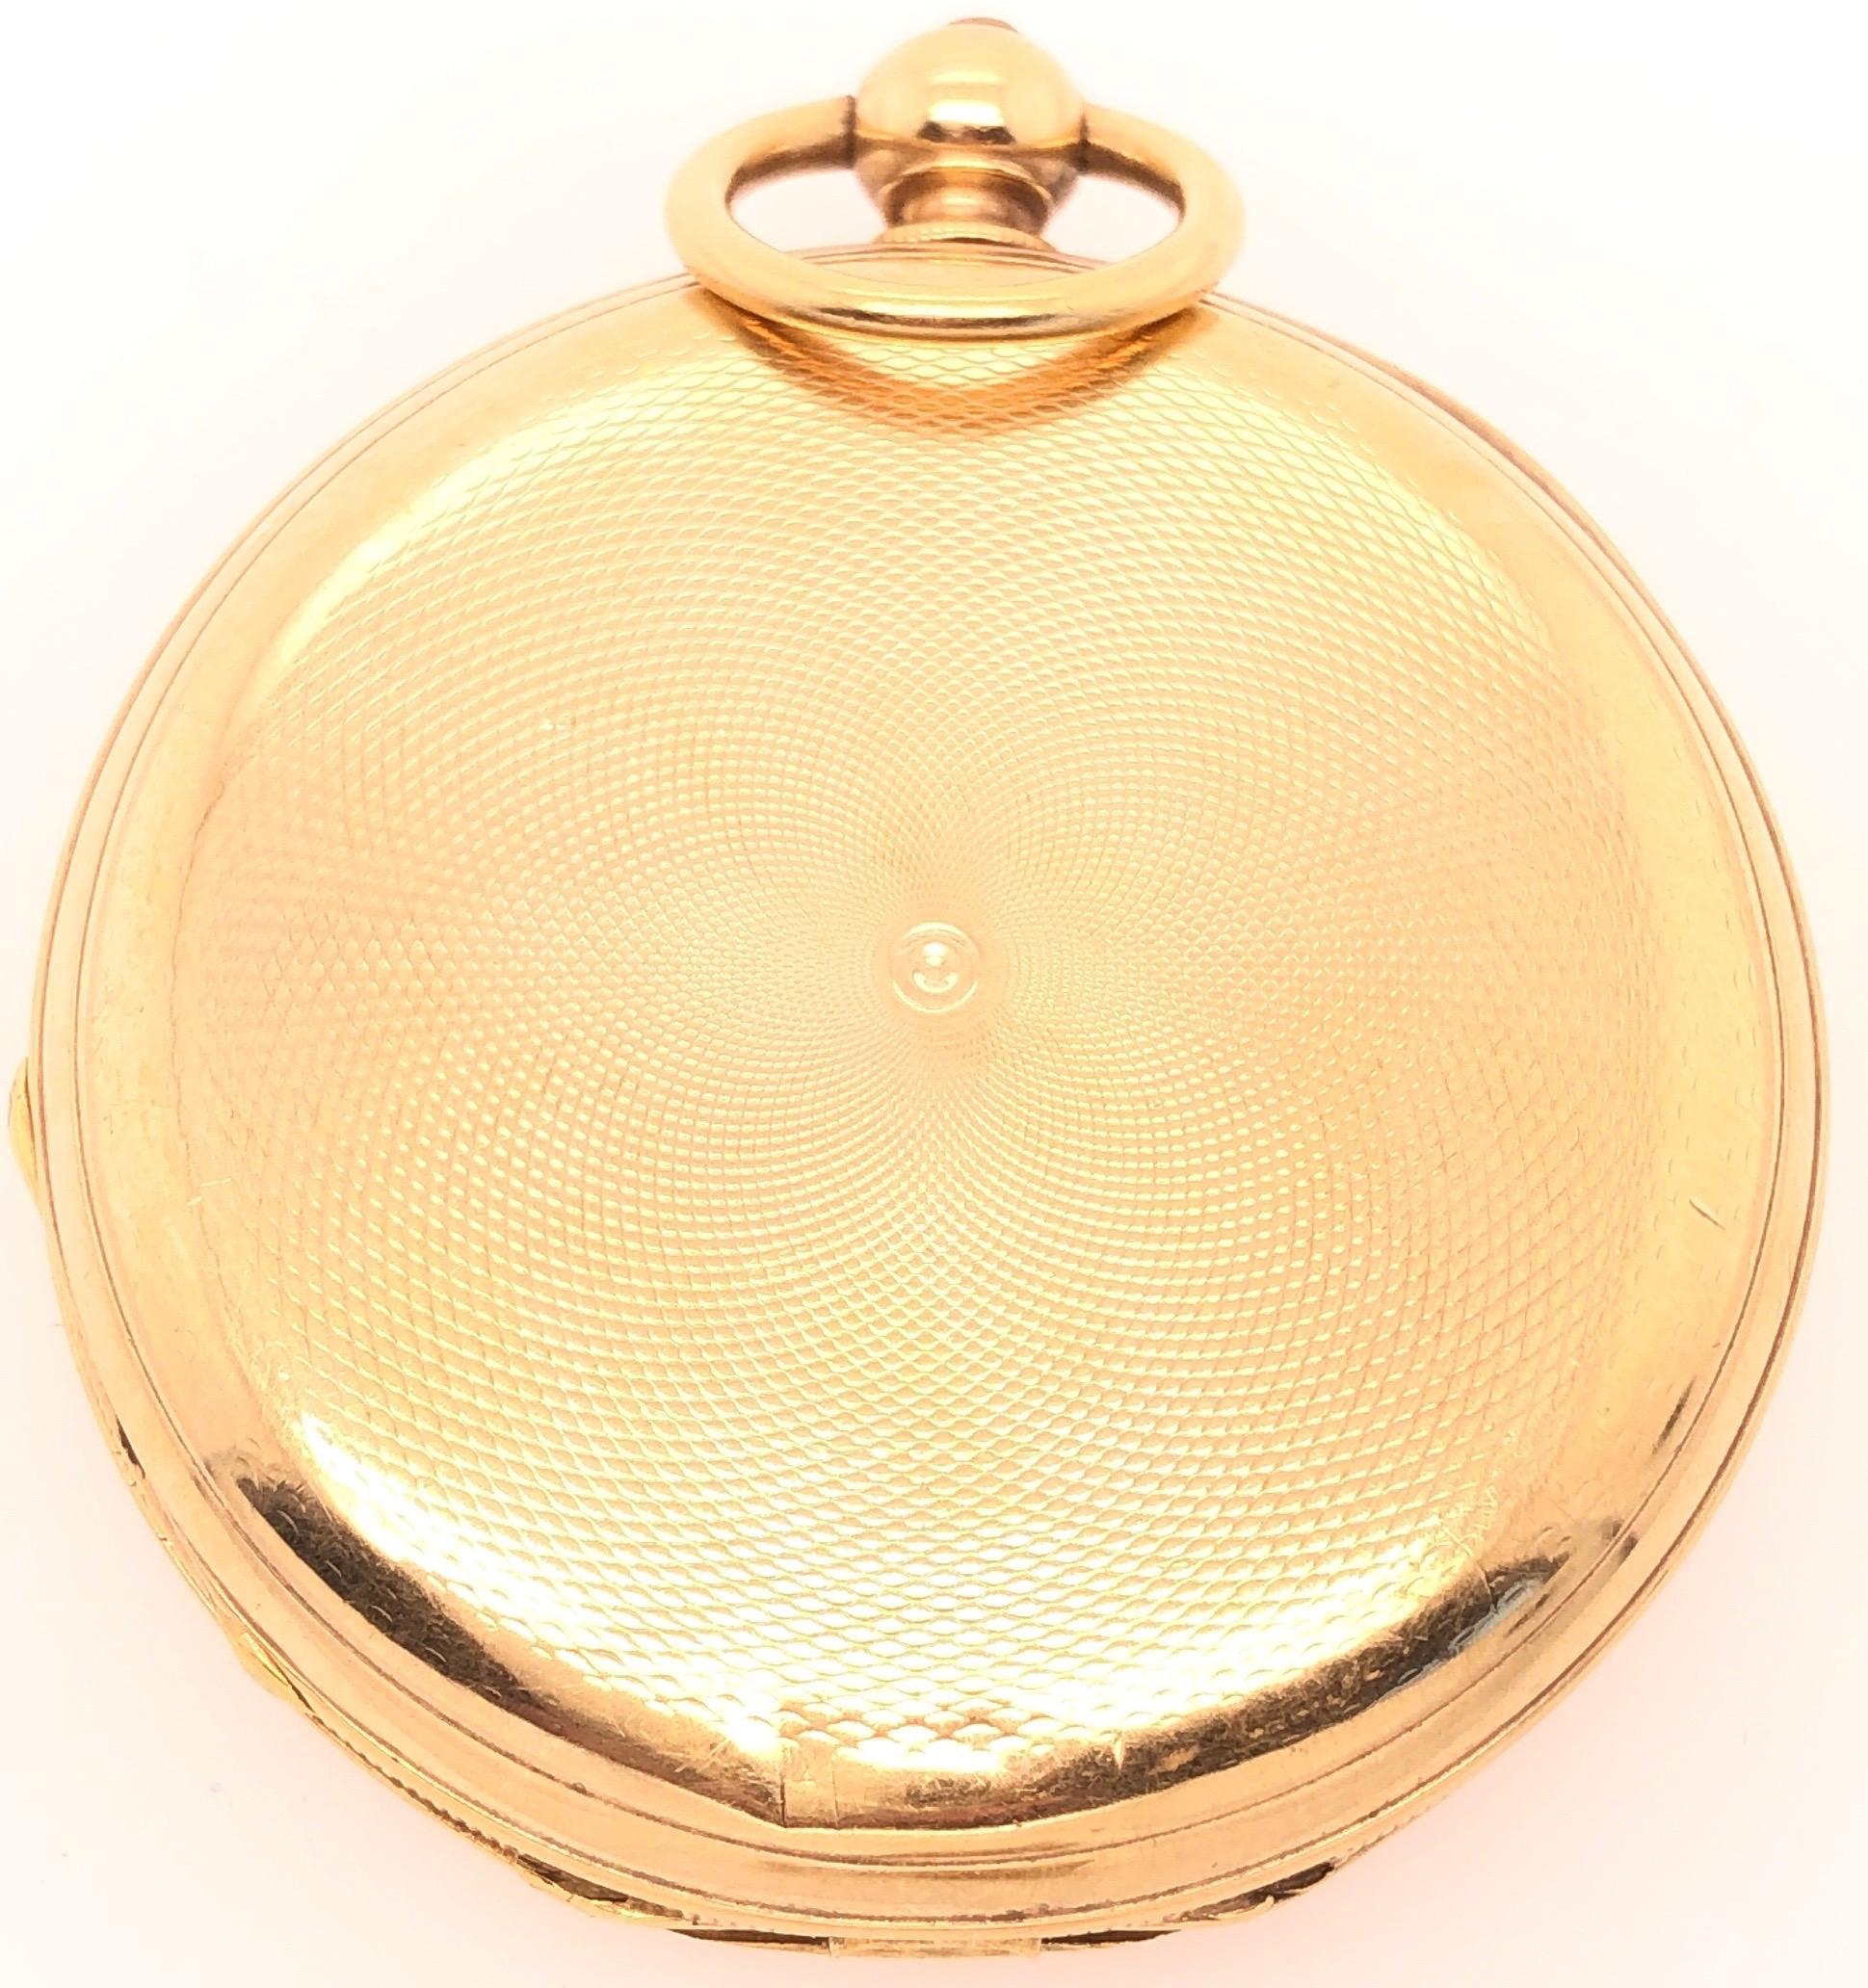 18 Karat Yellow Gold Breguet Paris Key wind Pocket Watch Medallion Style 
43 mm diameter. No. 1394 Case with minor flaws and very slight dents. Too slight to photograph. 